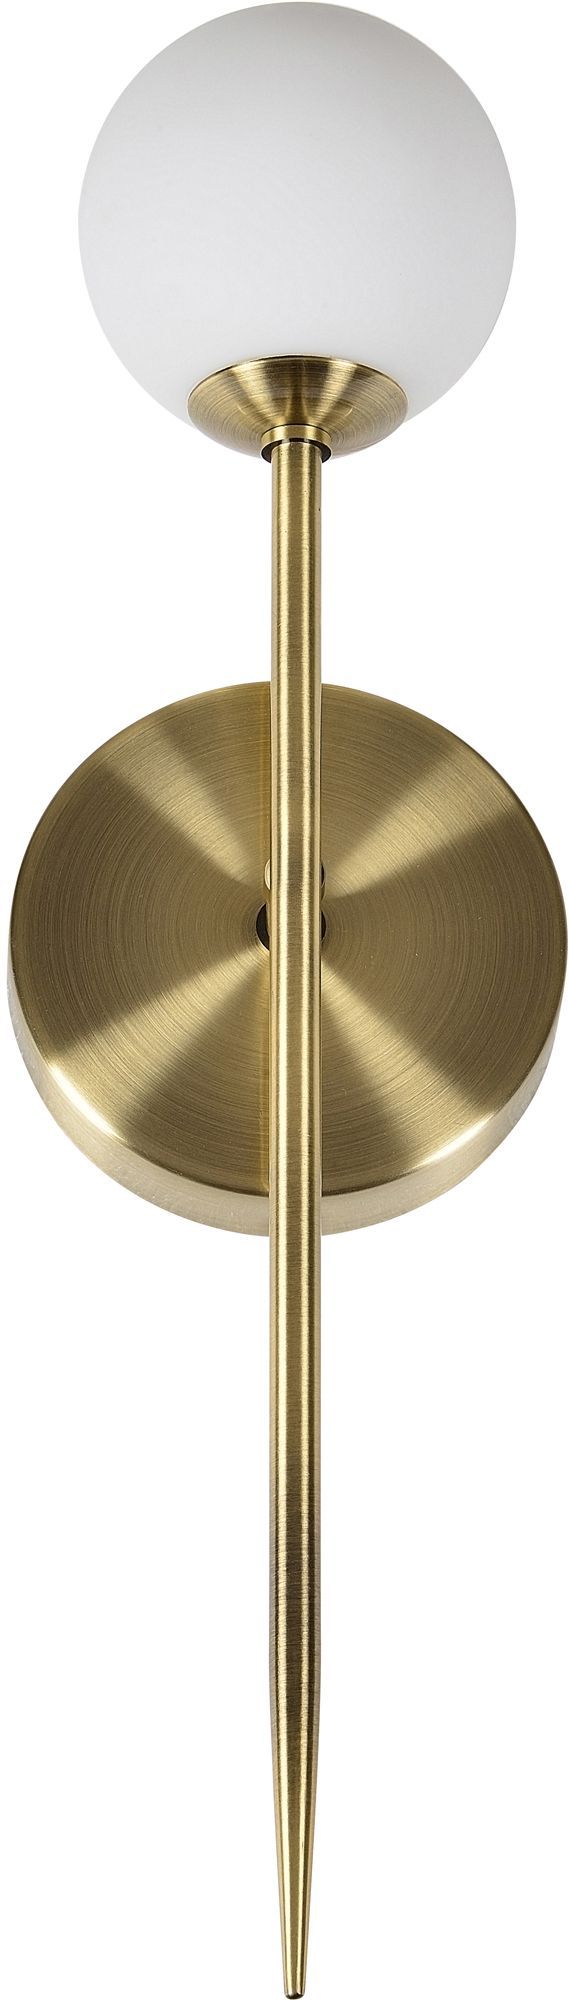 Renwil® Gianni Antique Brass Wall Sconce 0